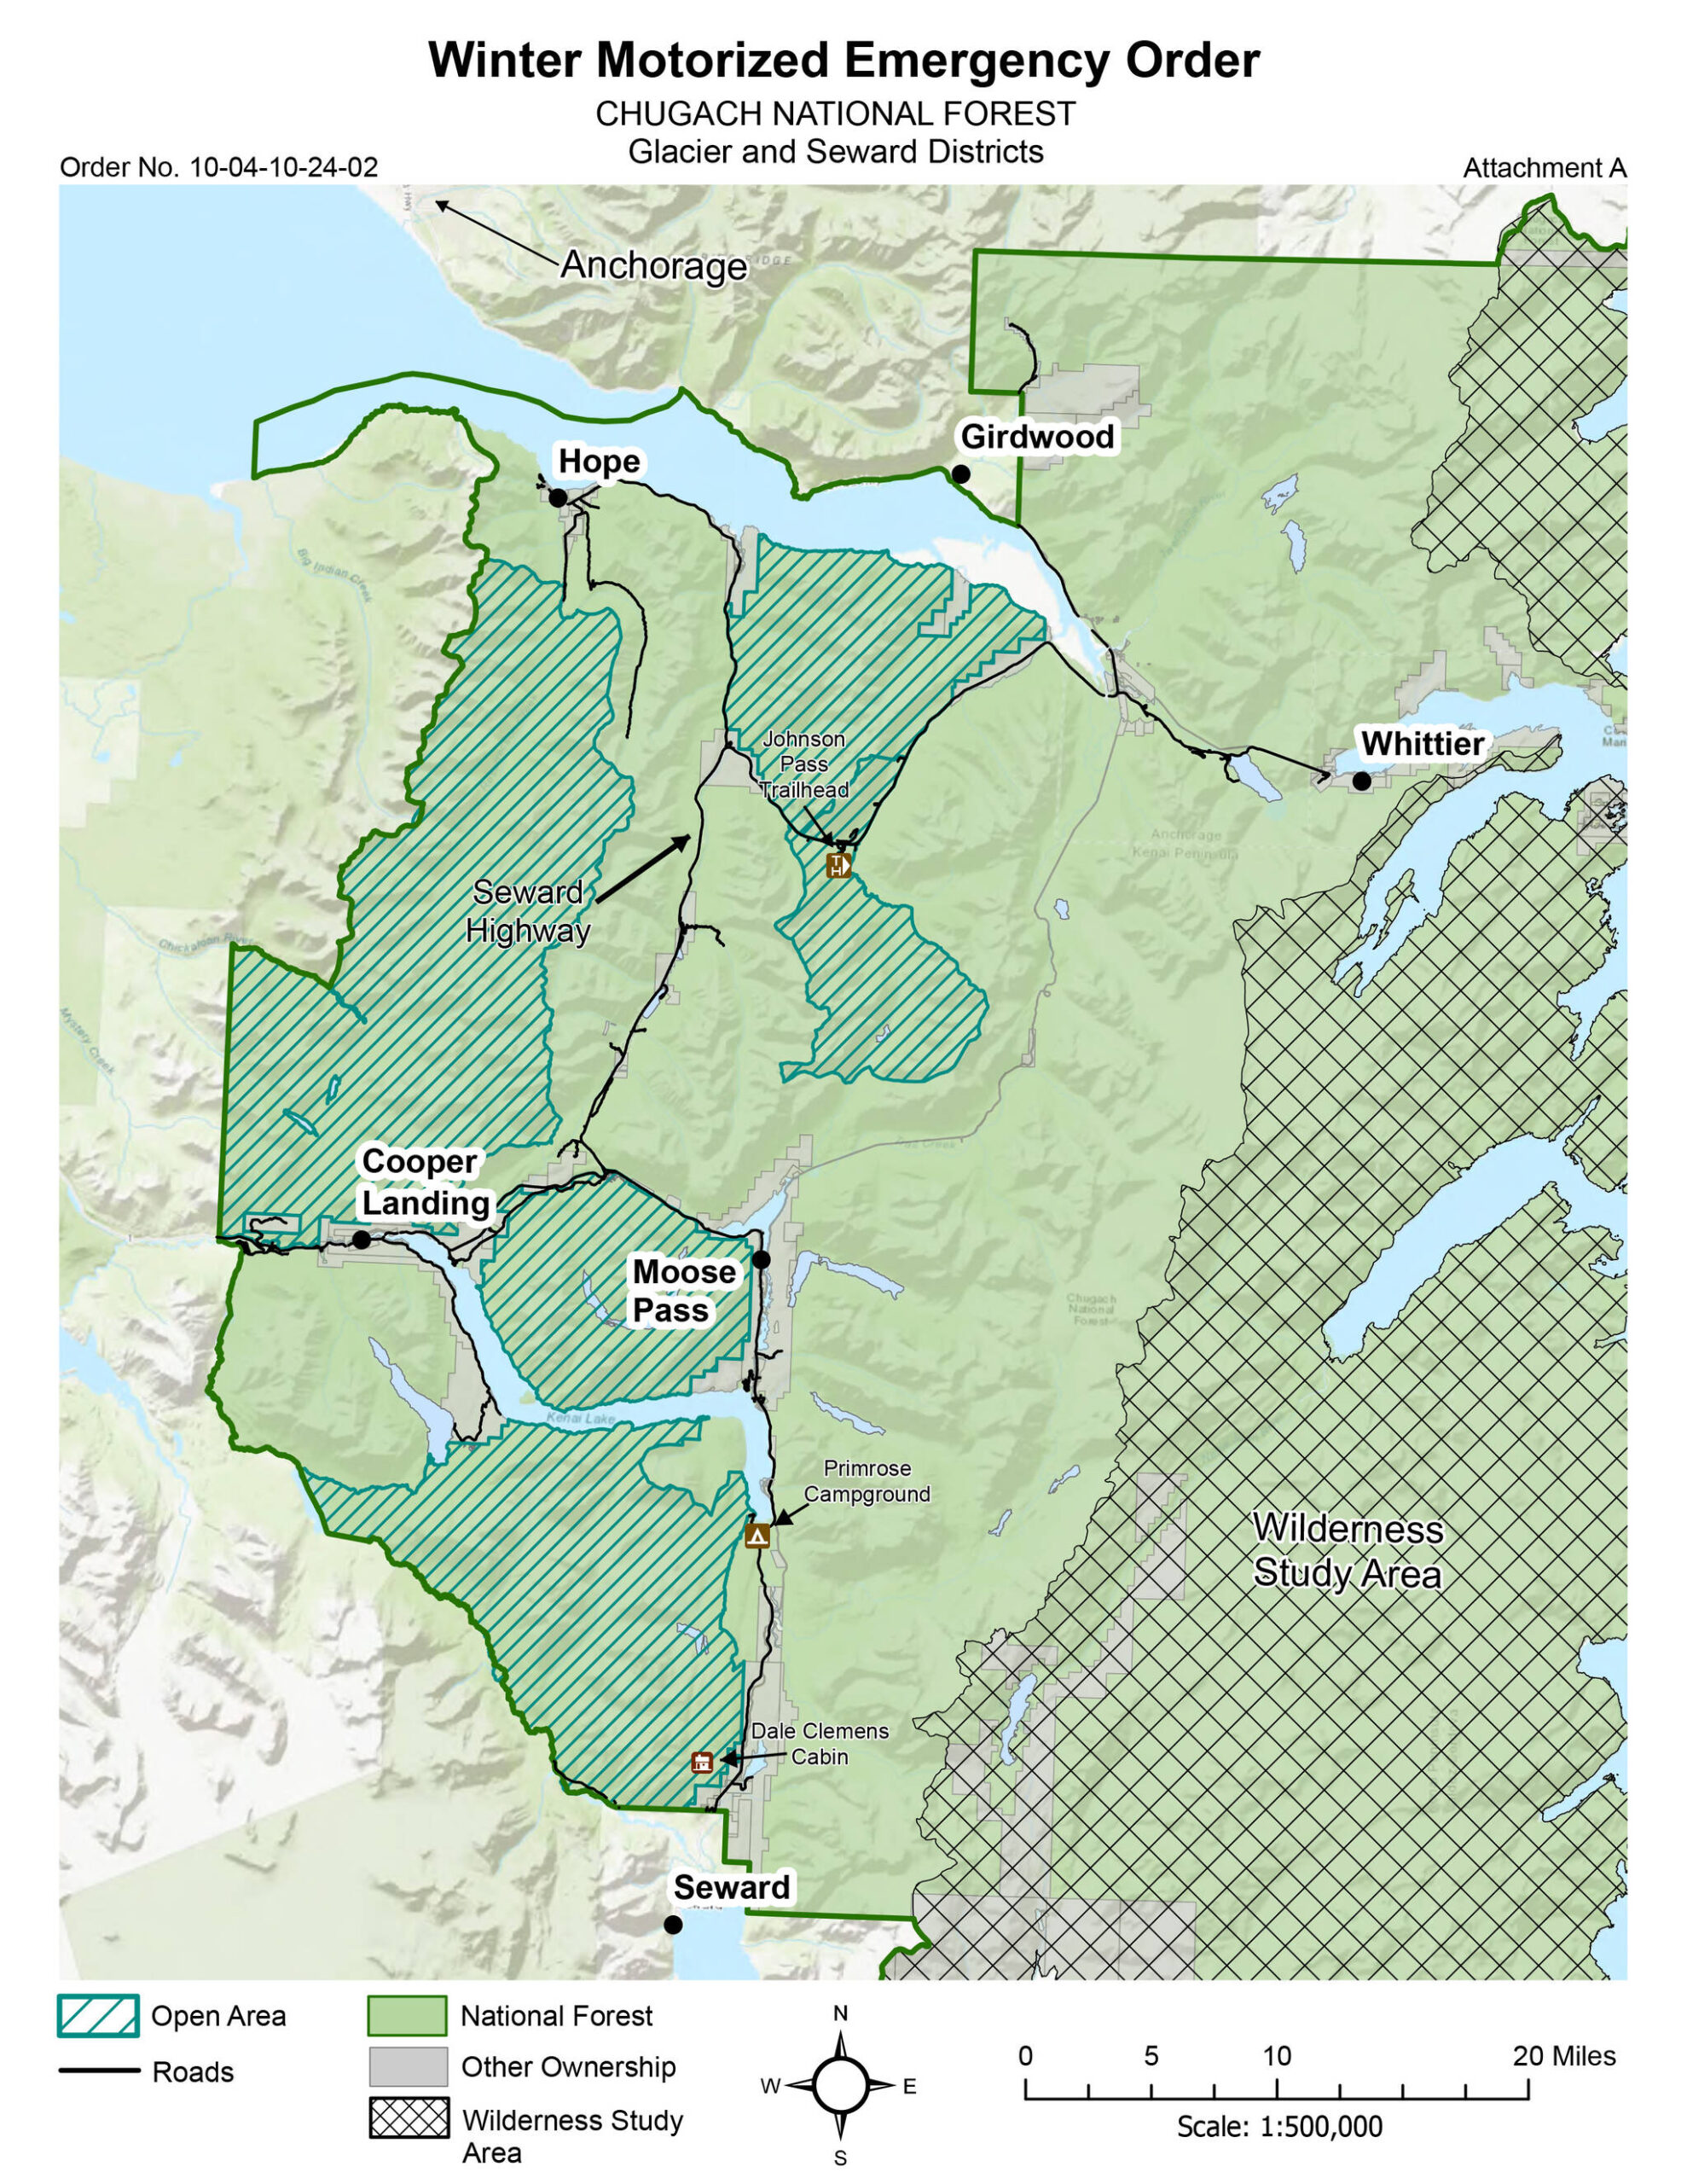 A map of areas now available to snowmachine use in the Chugach National Forest. (Provided by Chugach National Forest)